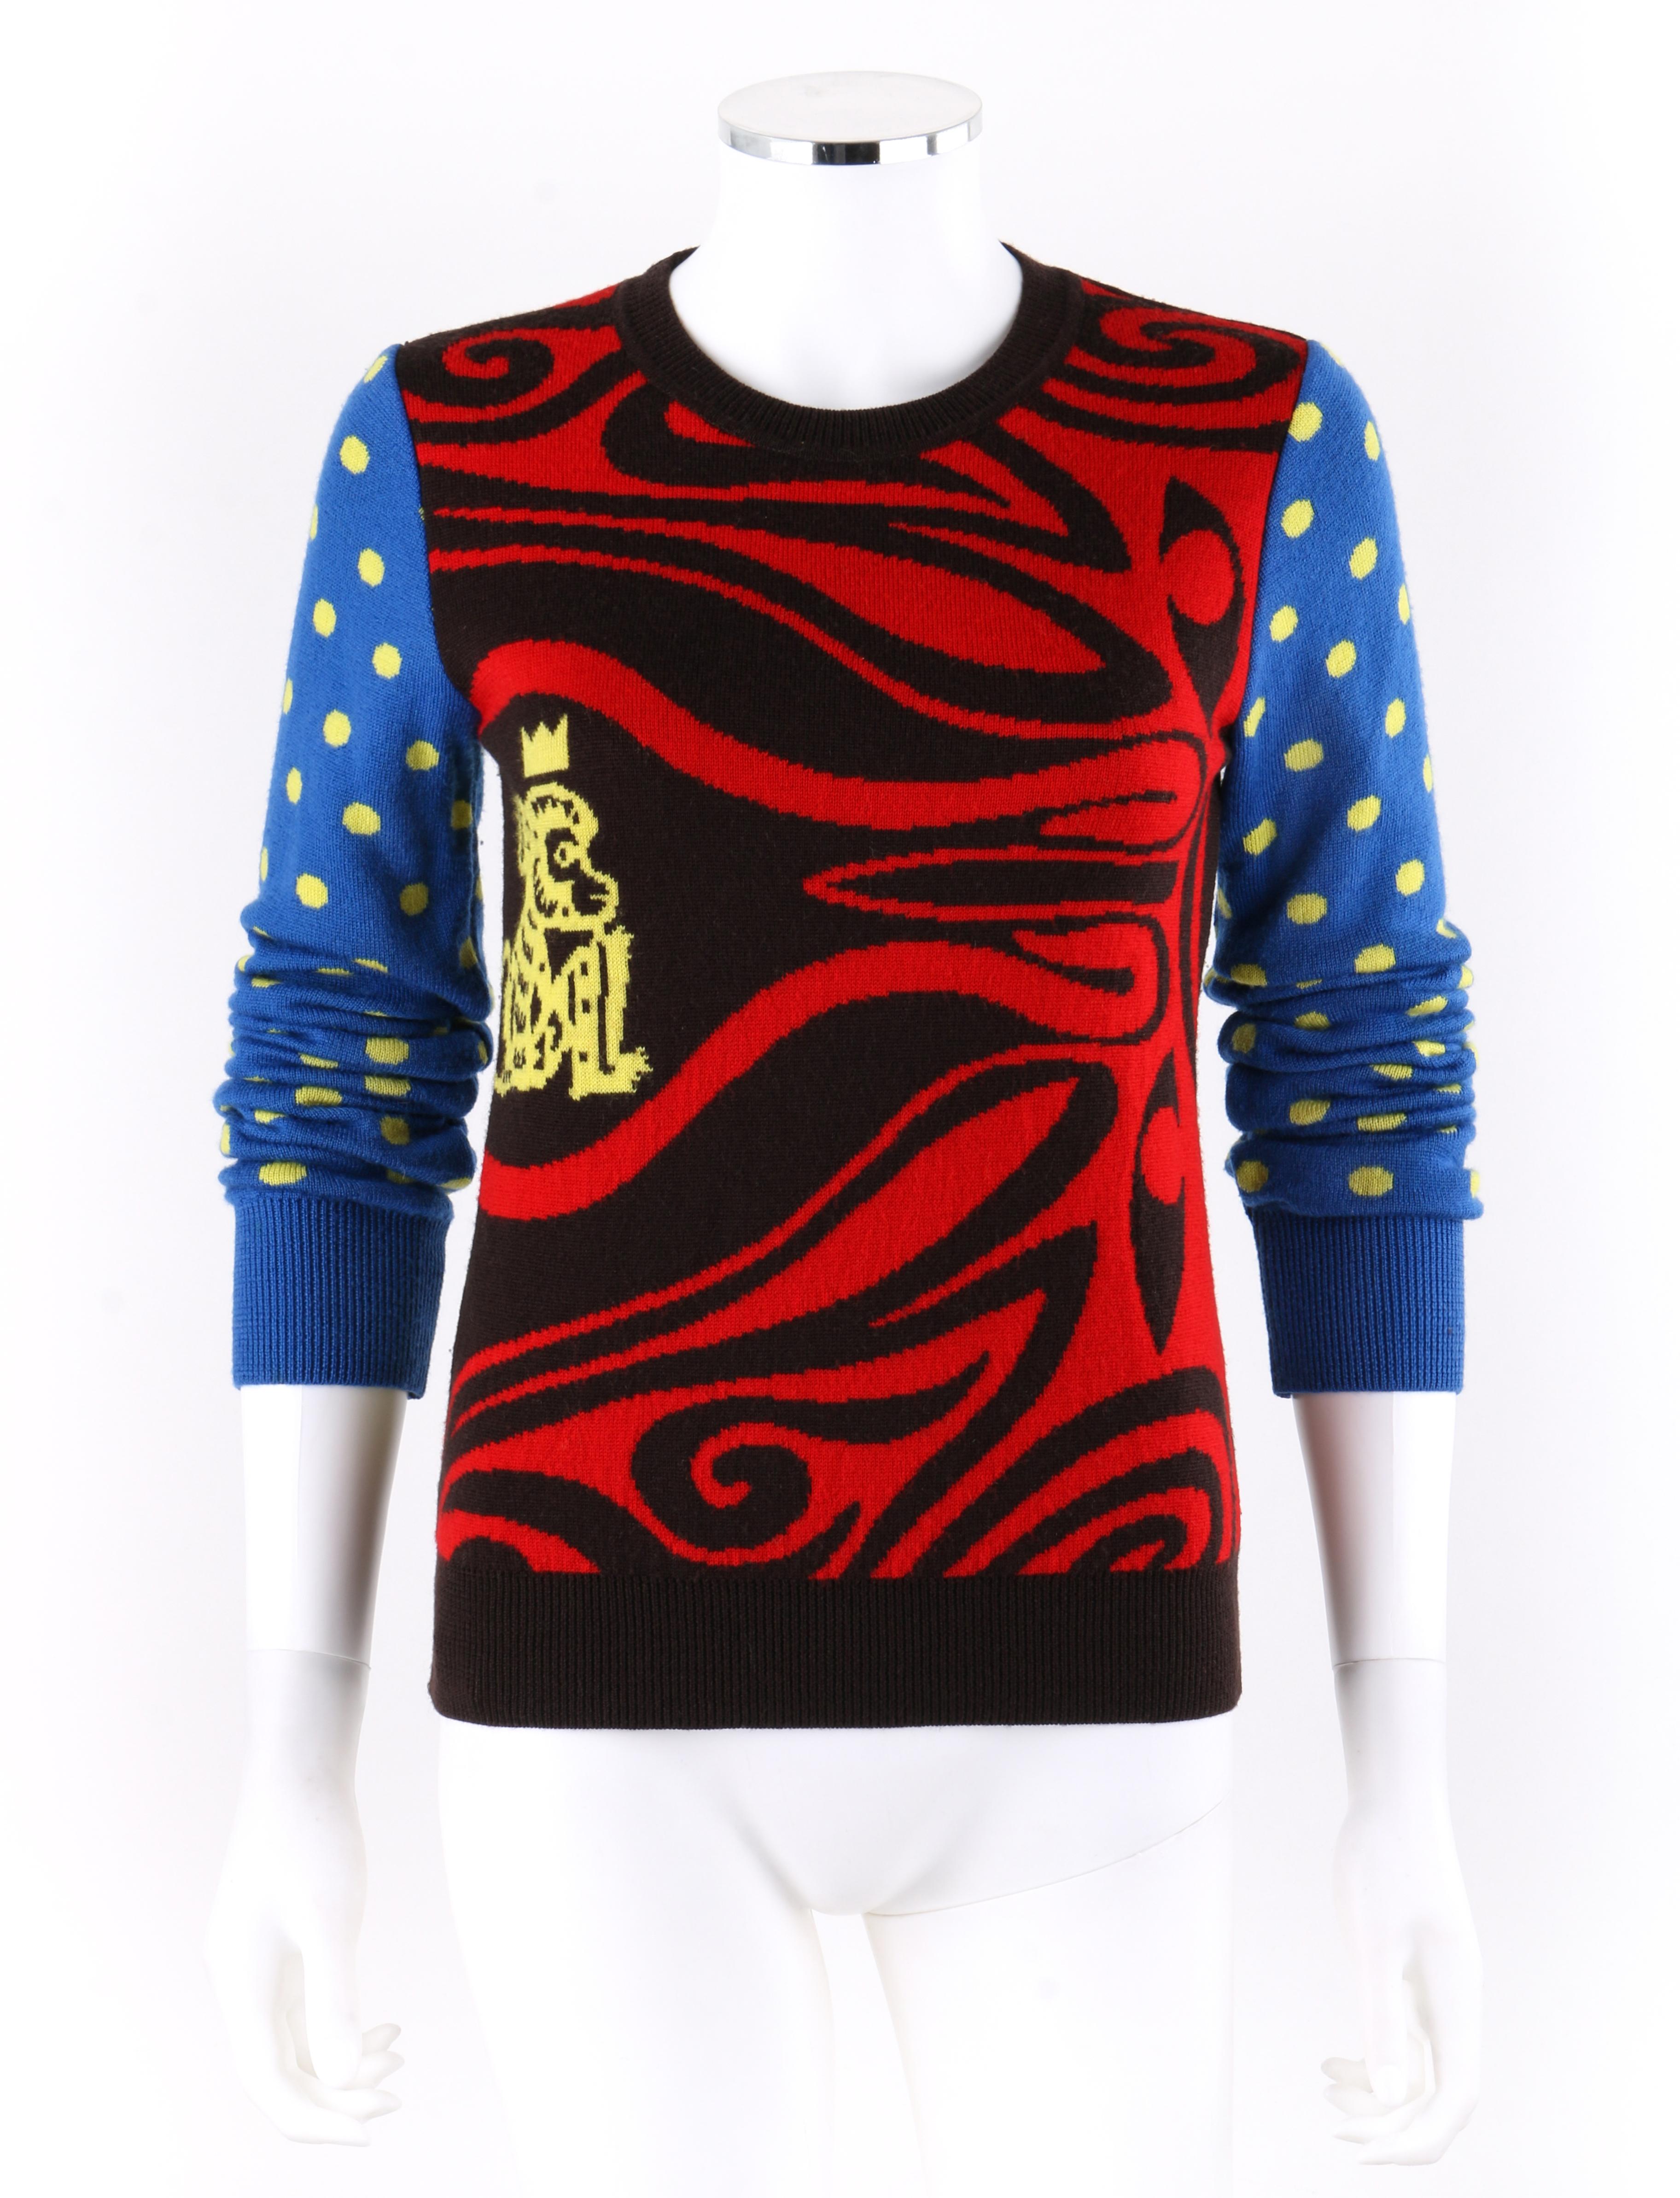 WALTER VAN BEIRENDONCK 2000’s Multi-Color Abstract Polka Dot Monkey Sweater 
 
Brand / Manufacturer: Walter Van Beirendonck 
Designer: Walter Van Beirendonck 
Style: Sweater
Color(s): Shades of black, brown, red, blue and yellow
Lined: No     